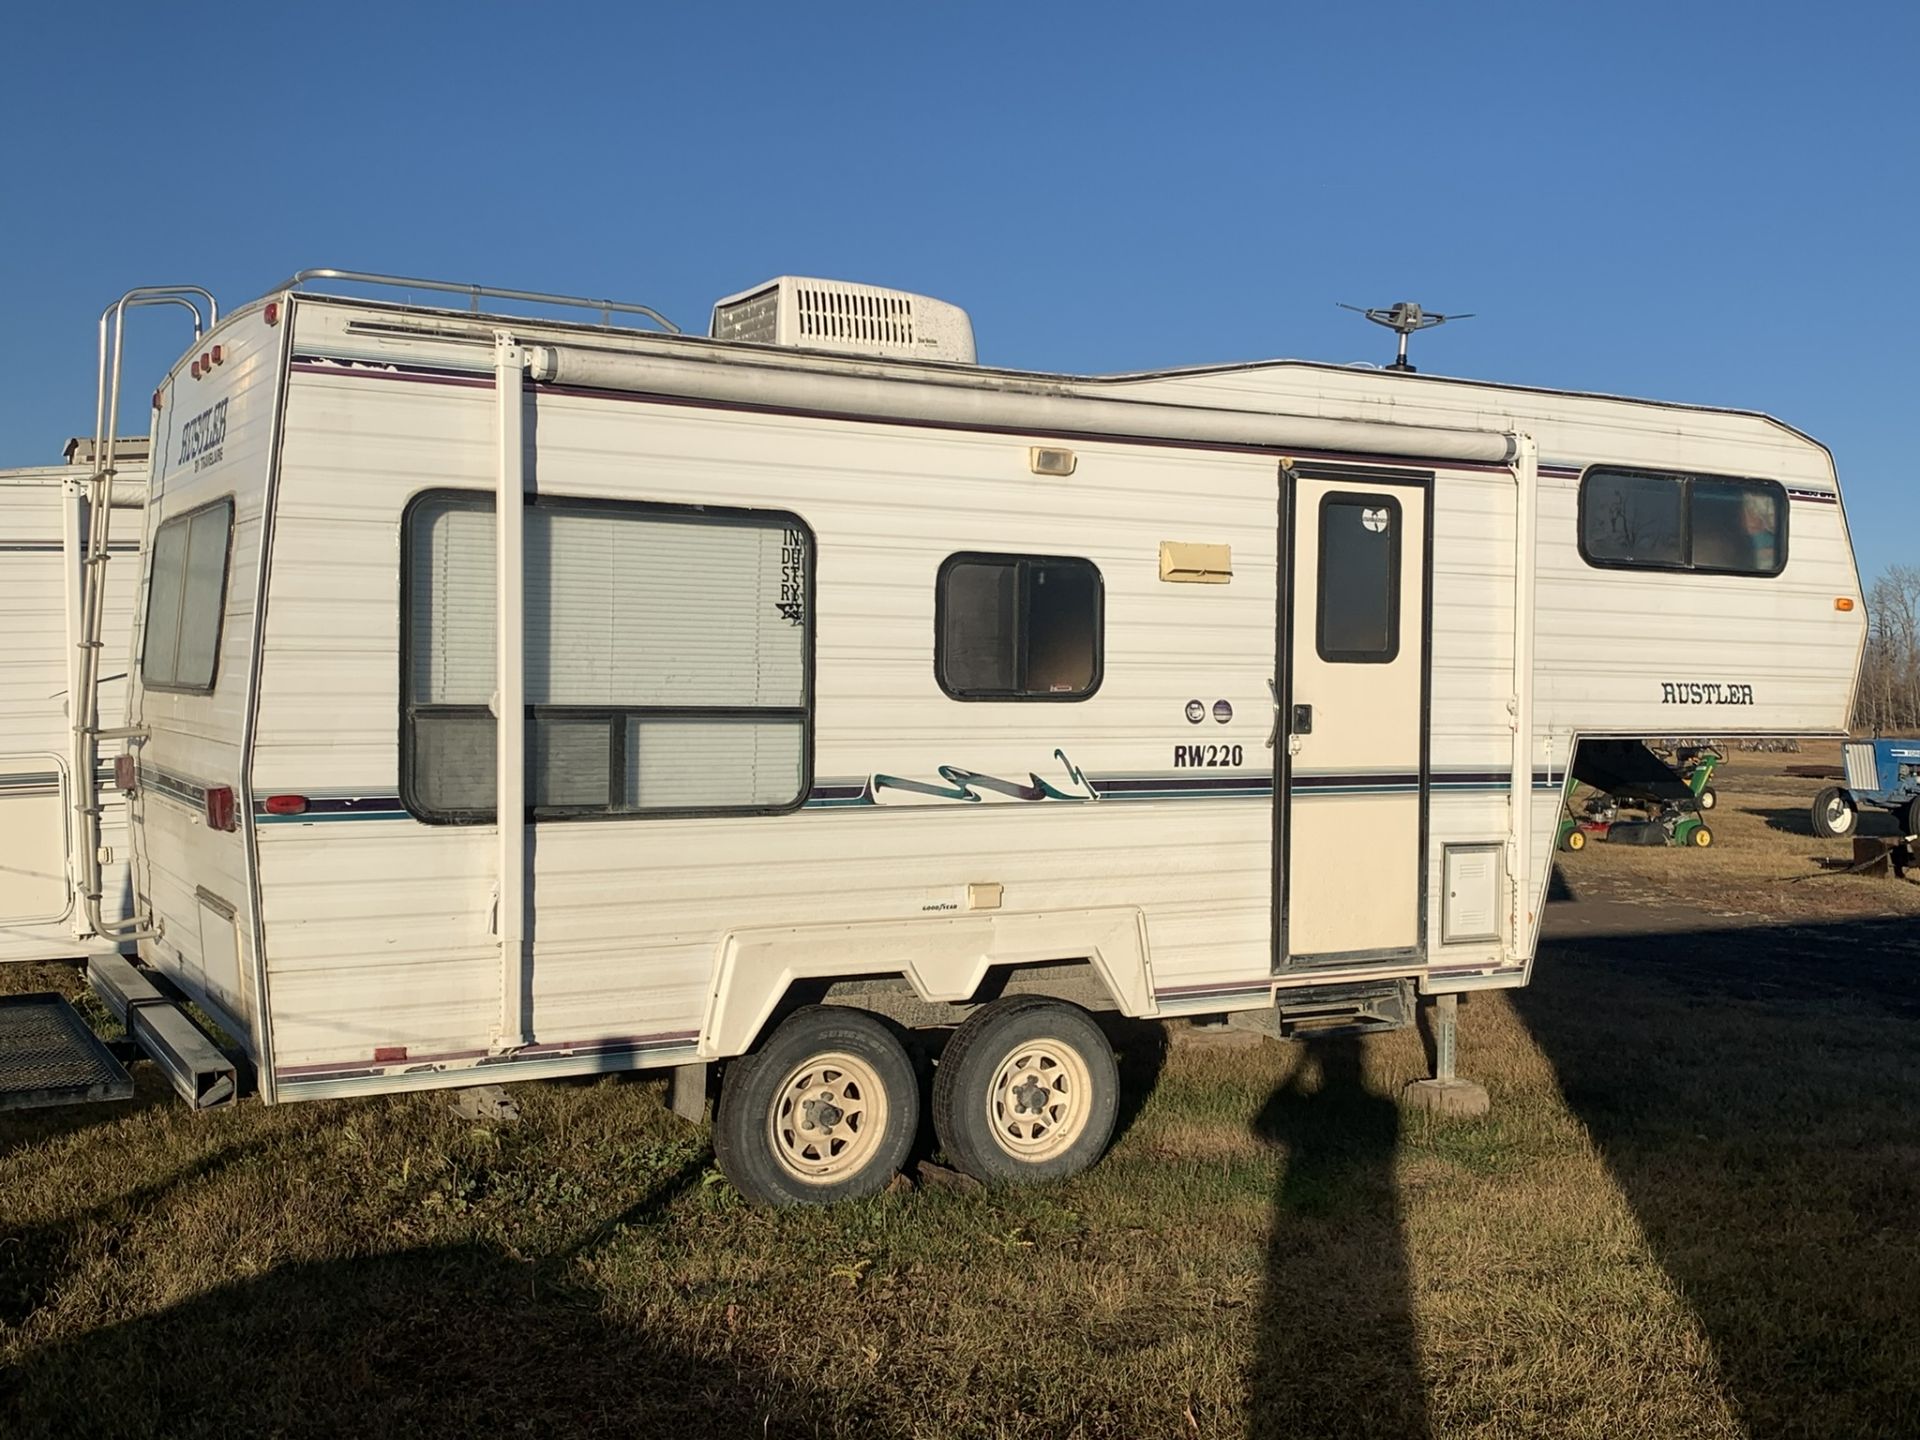 1996 TRAVELAIRE RUSTLER RW220 5TH WHEEL HOLIDAY TRAILER, FRONT QUEEN BED, REAR KITCHEN, AC - Image 5 of 13